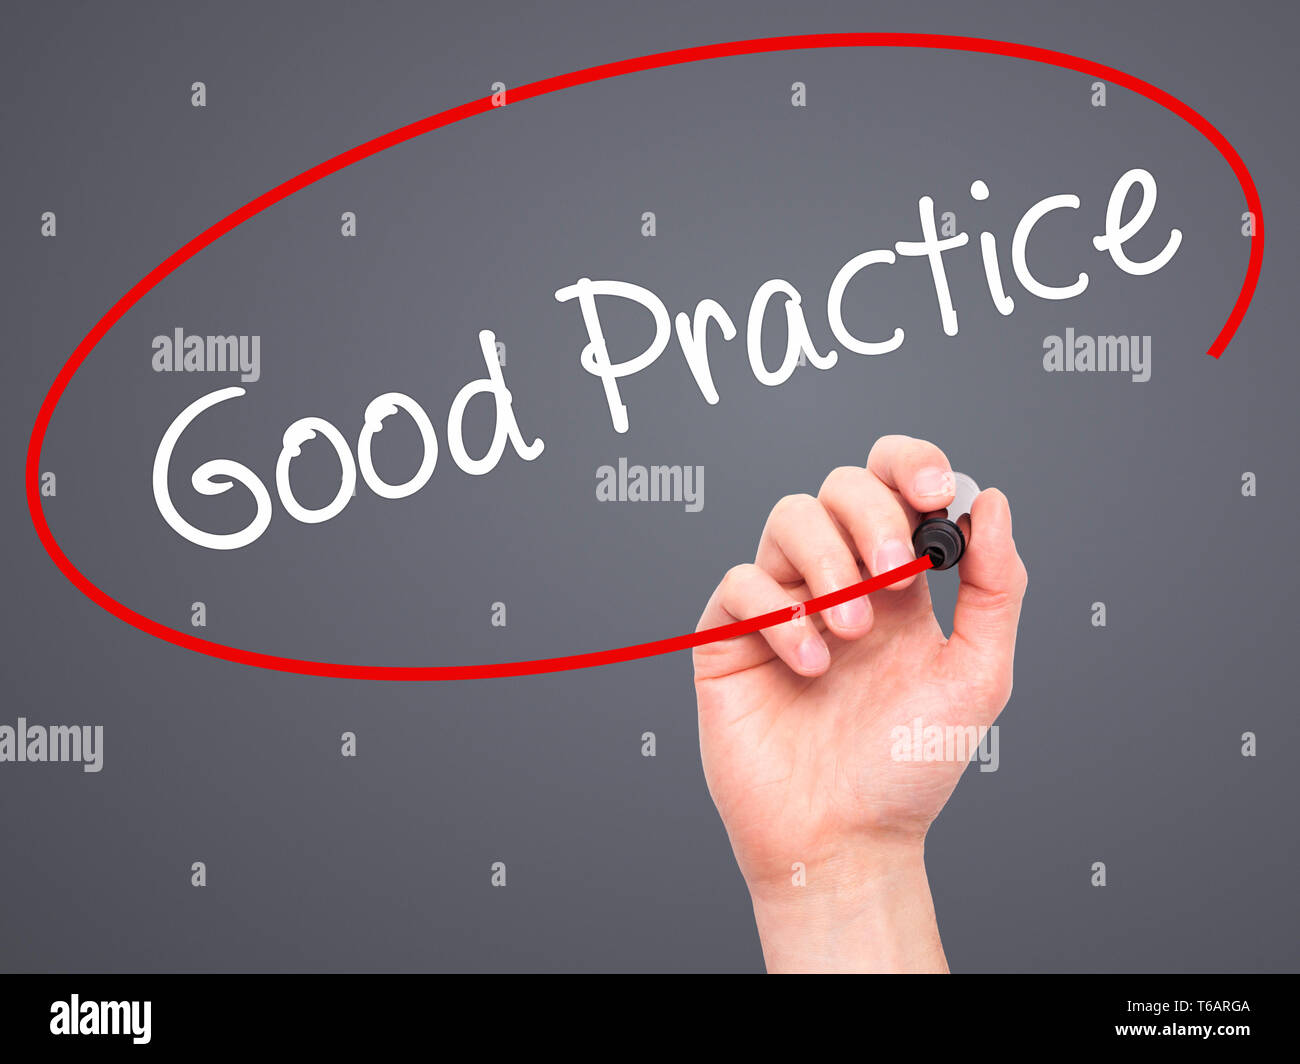 Man Hand writing Good Practice with black marker on visual screen. Stock Photo